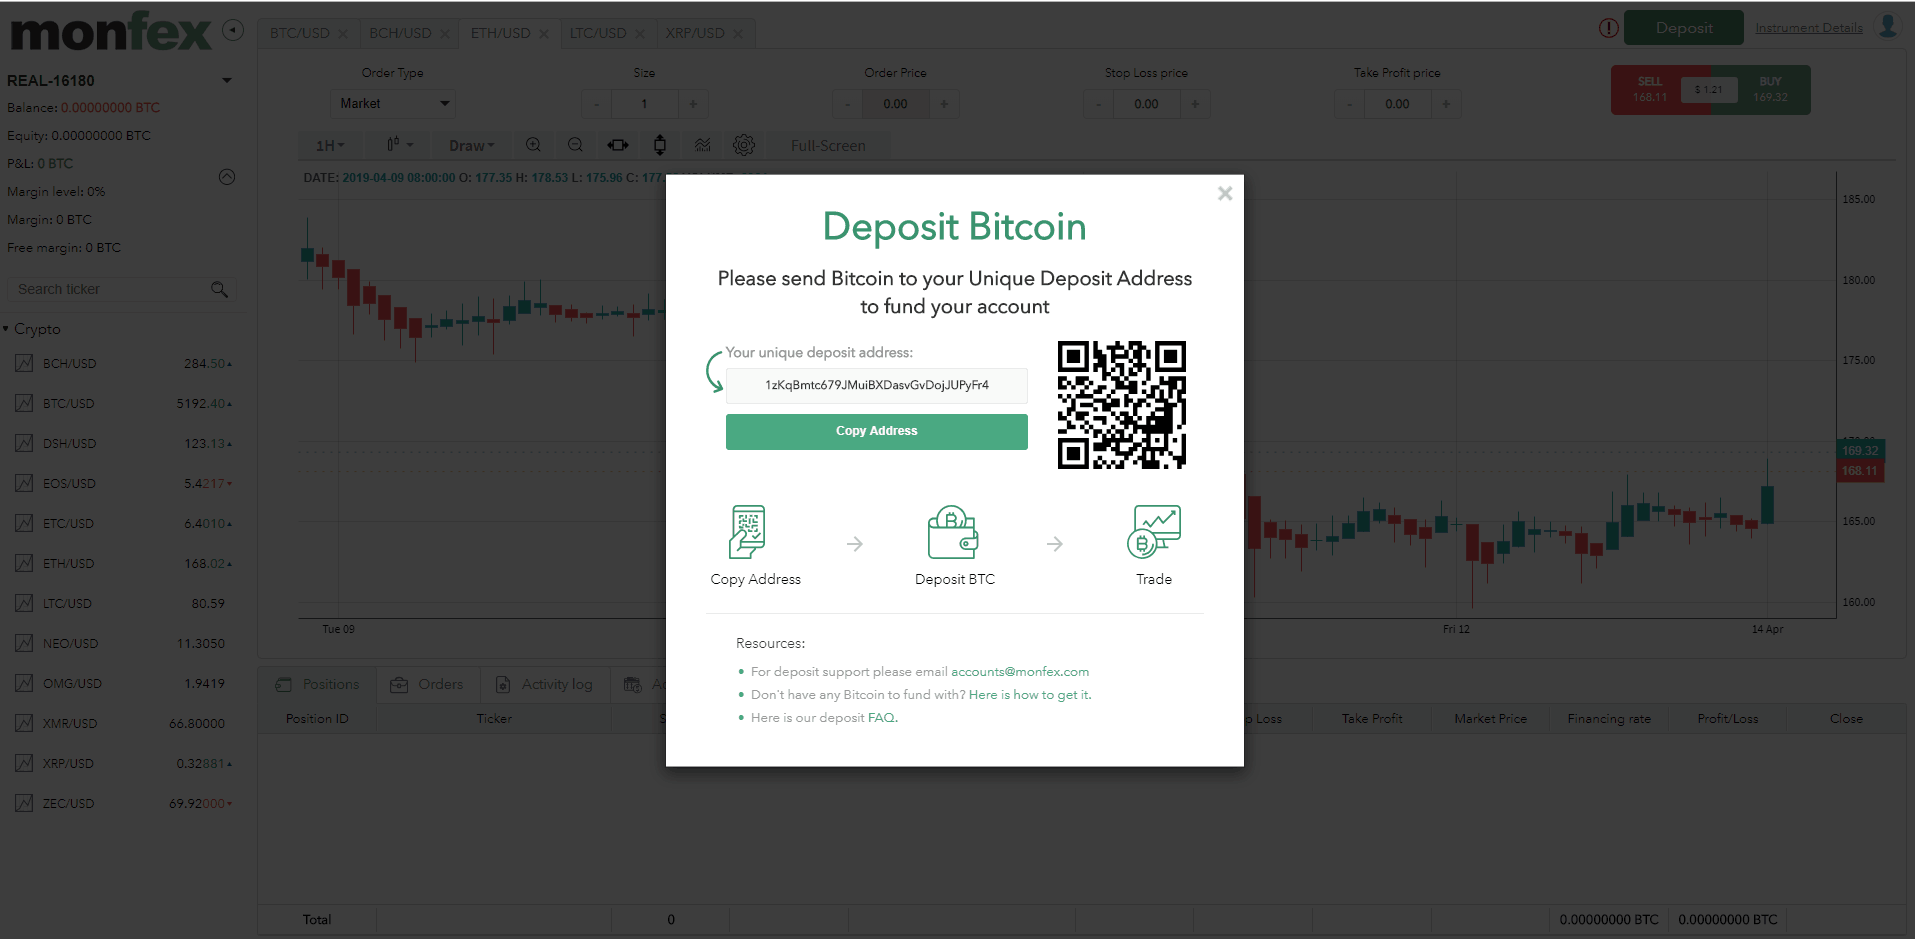 It’s very simple to deposit BTC to your trading account on Monfex.